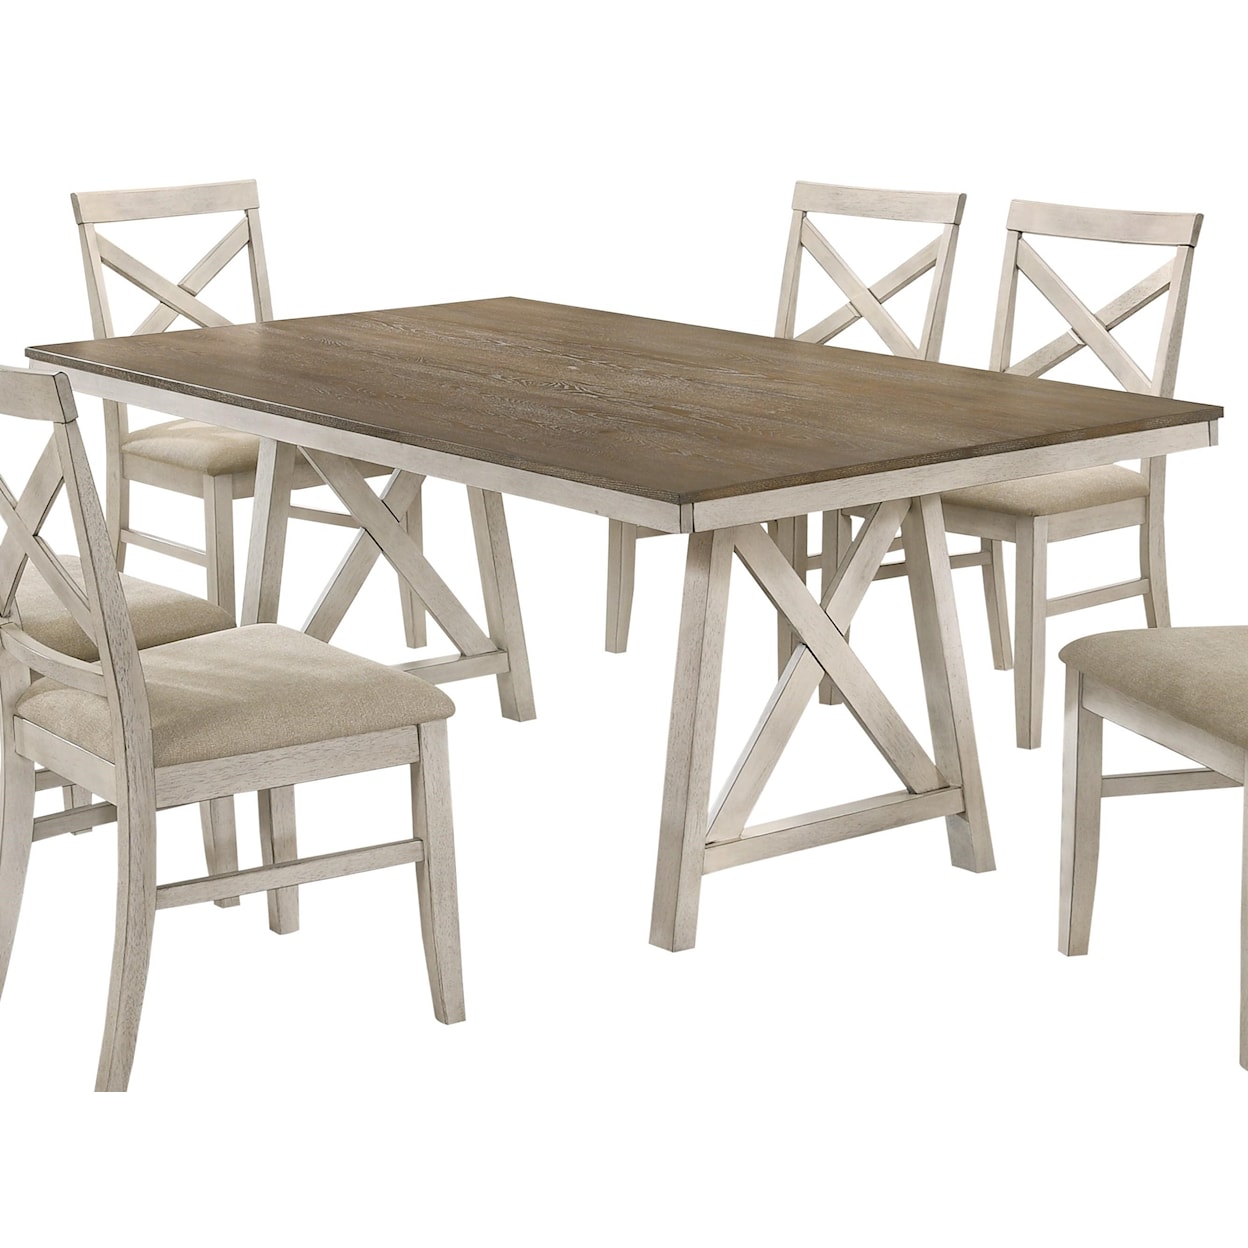 Lacey Furniture Somerset Dining Table